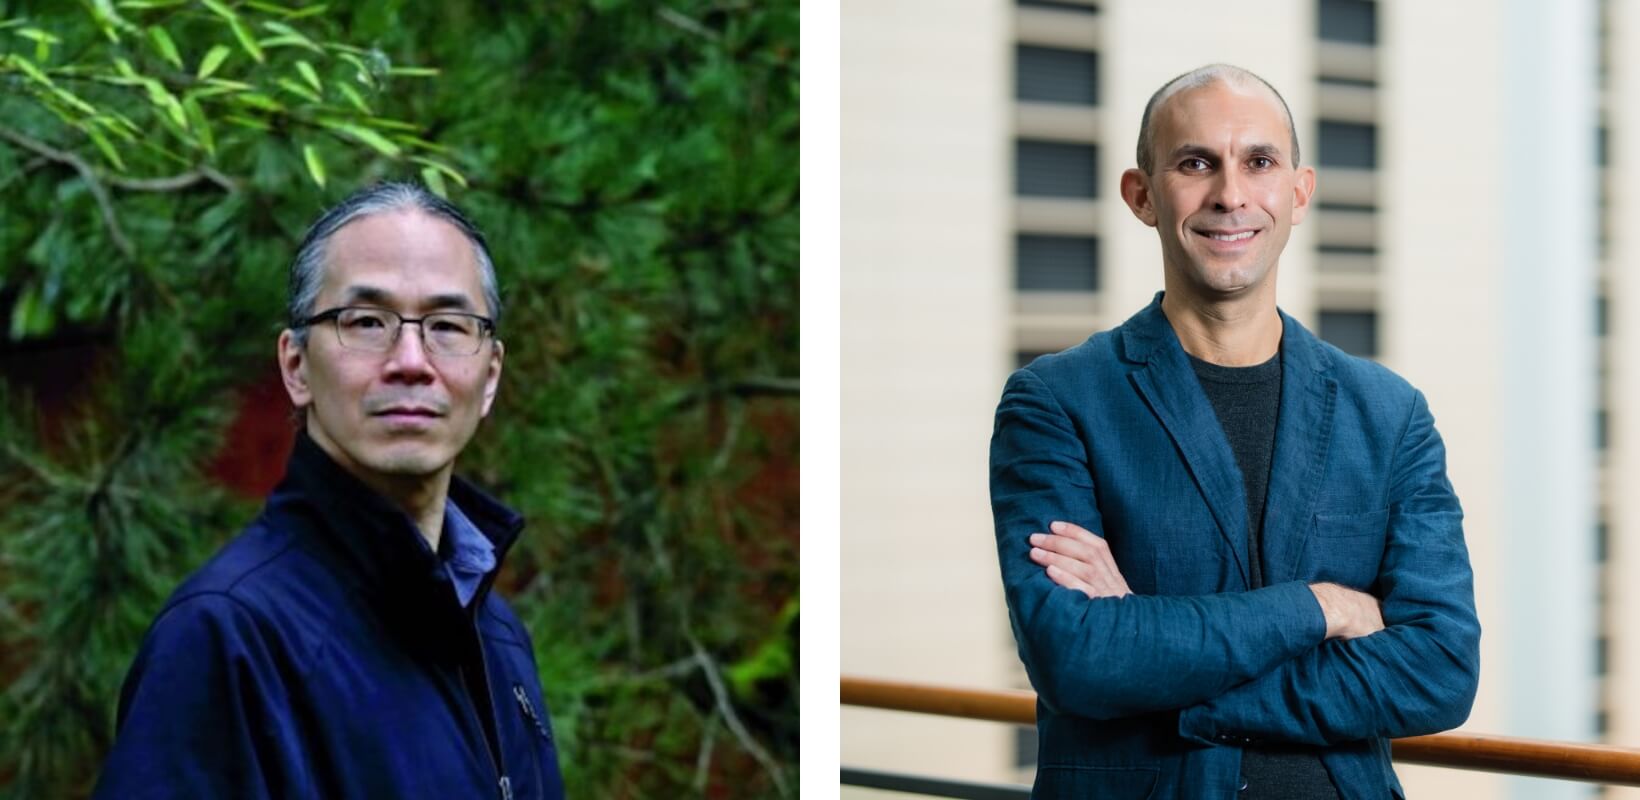 Ted Chiang (Science fiction writer) x Anil Seth (Neuroscientist; University of Sussex)